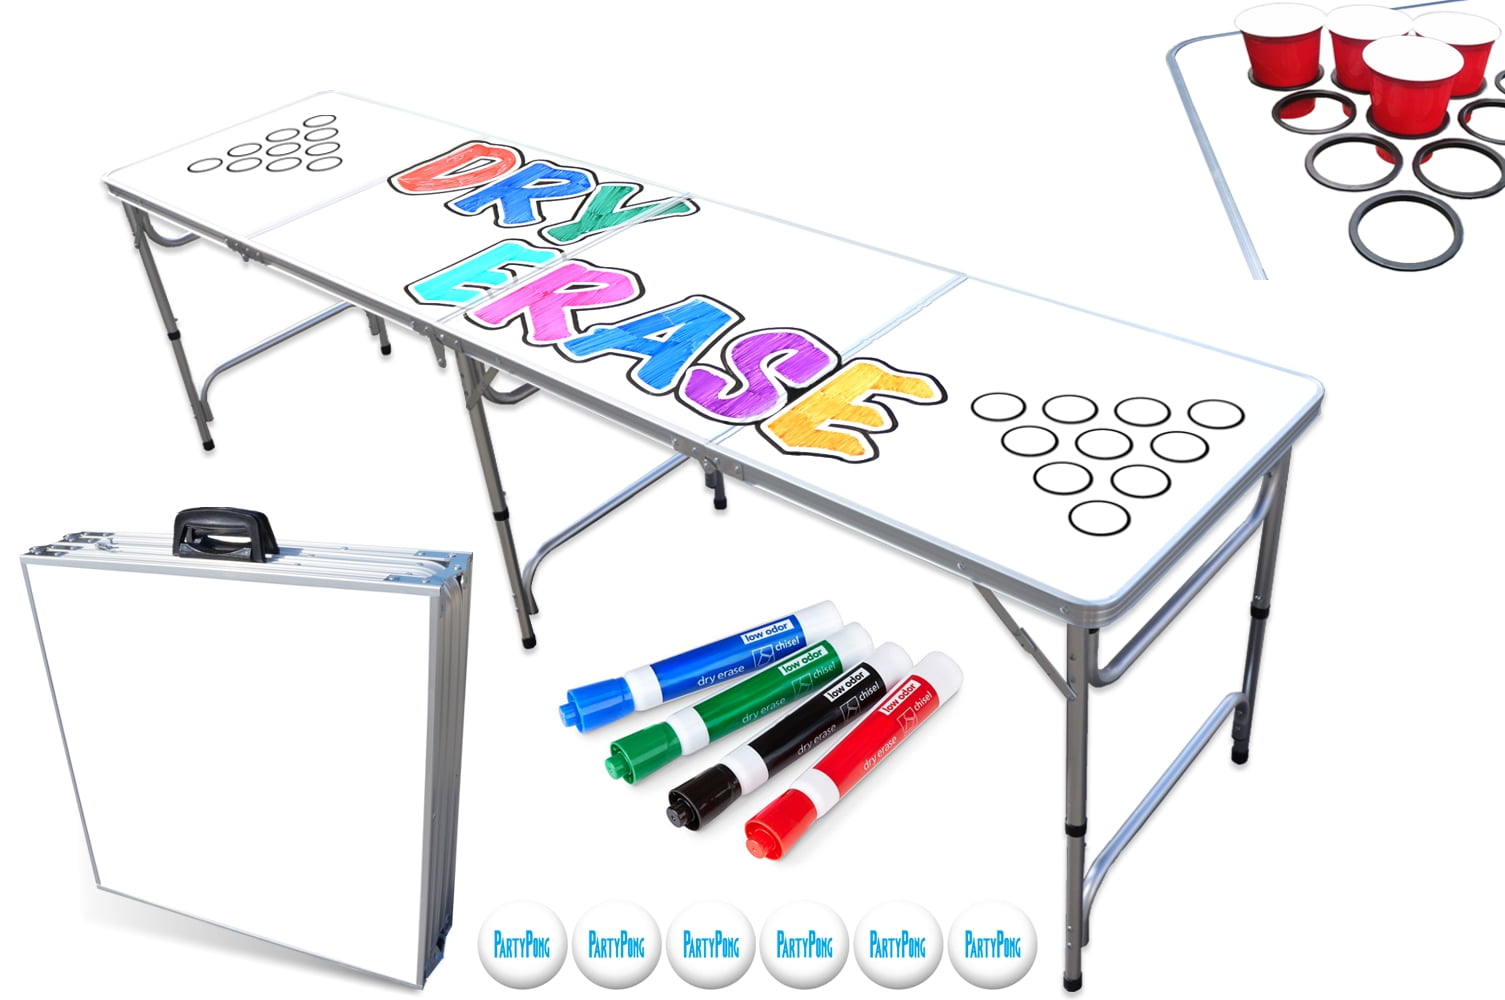 8-Foot Professional Beer Pong Table With Optional Cup Holes, LED Lights,  Dry Erase Surface & Party Pong Graphics - Choose Your Table Model